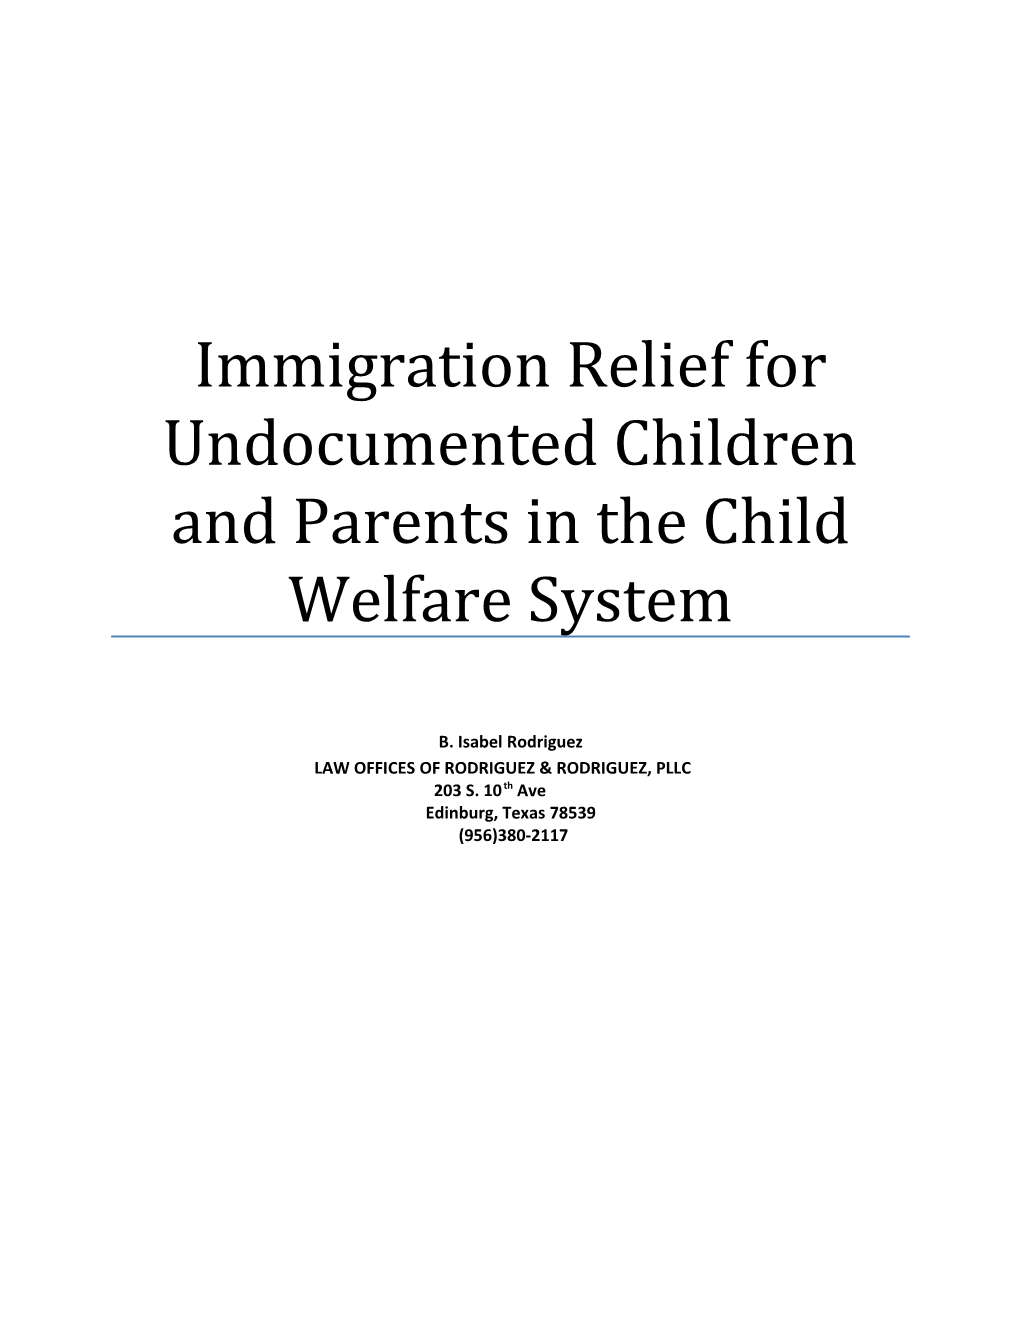 Immigration Relief for Undocumented Children and Parents in the Child Welfare System